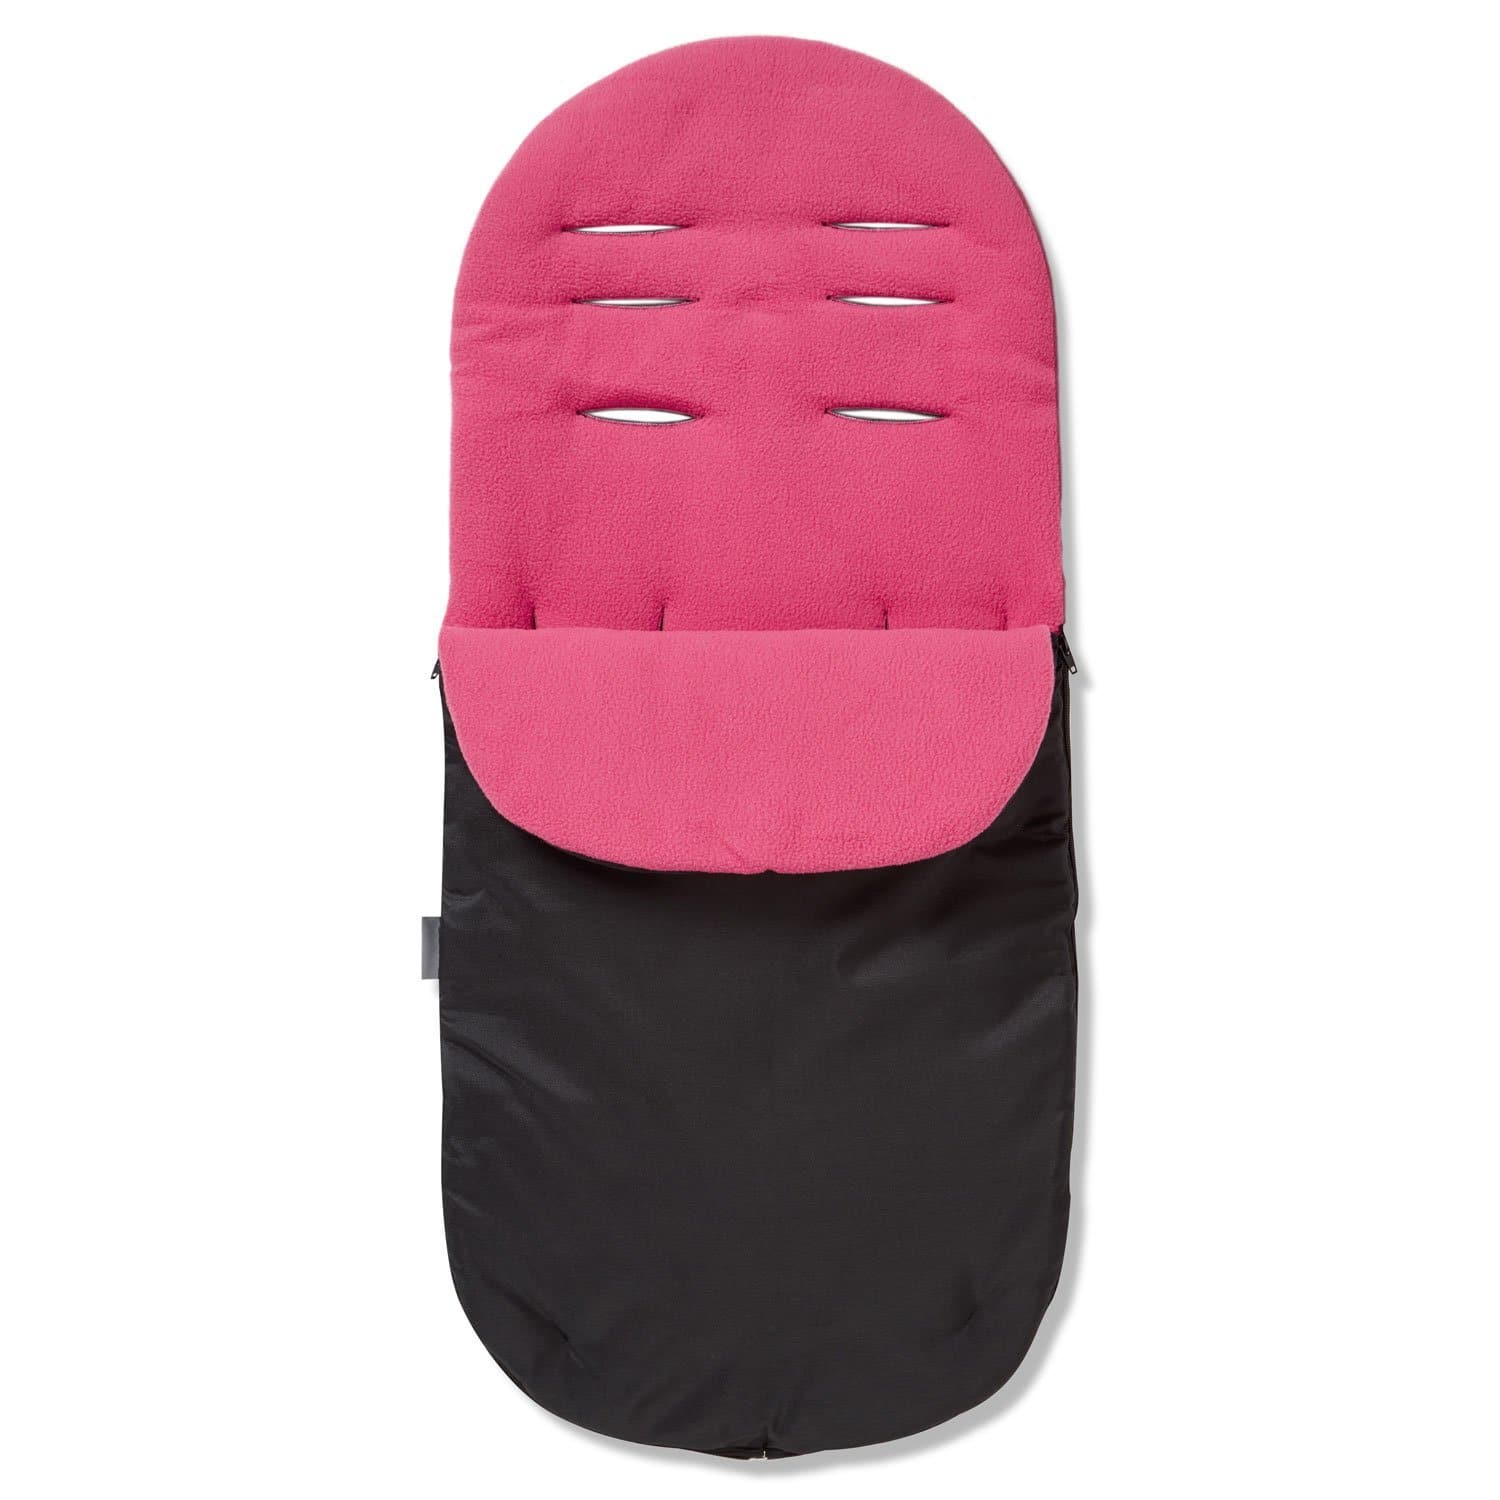 Footmuff / Cosy Toes Compatible with Uppababy - Dark Pink / Fits All Models | For Your Little One